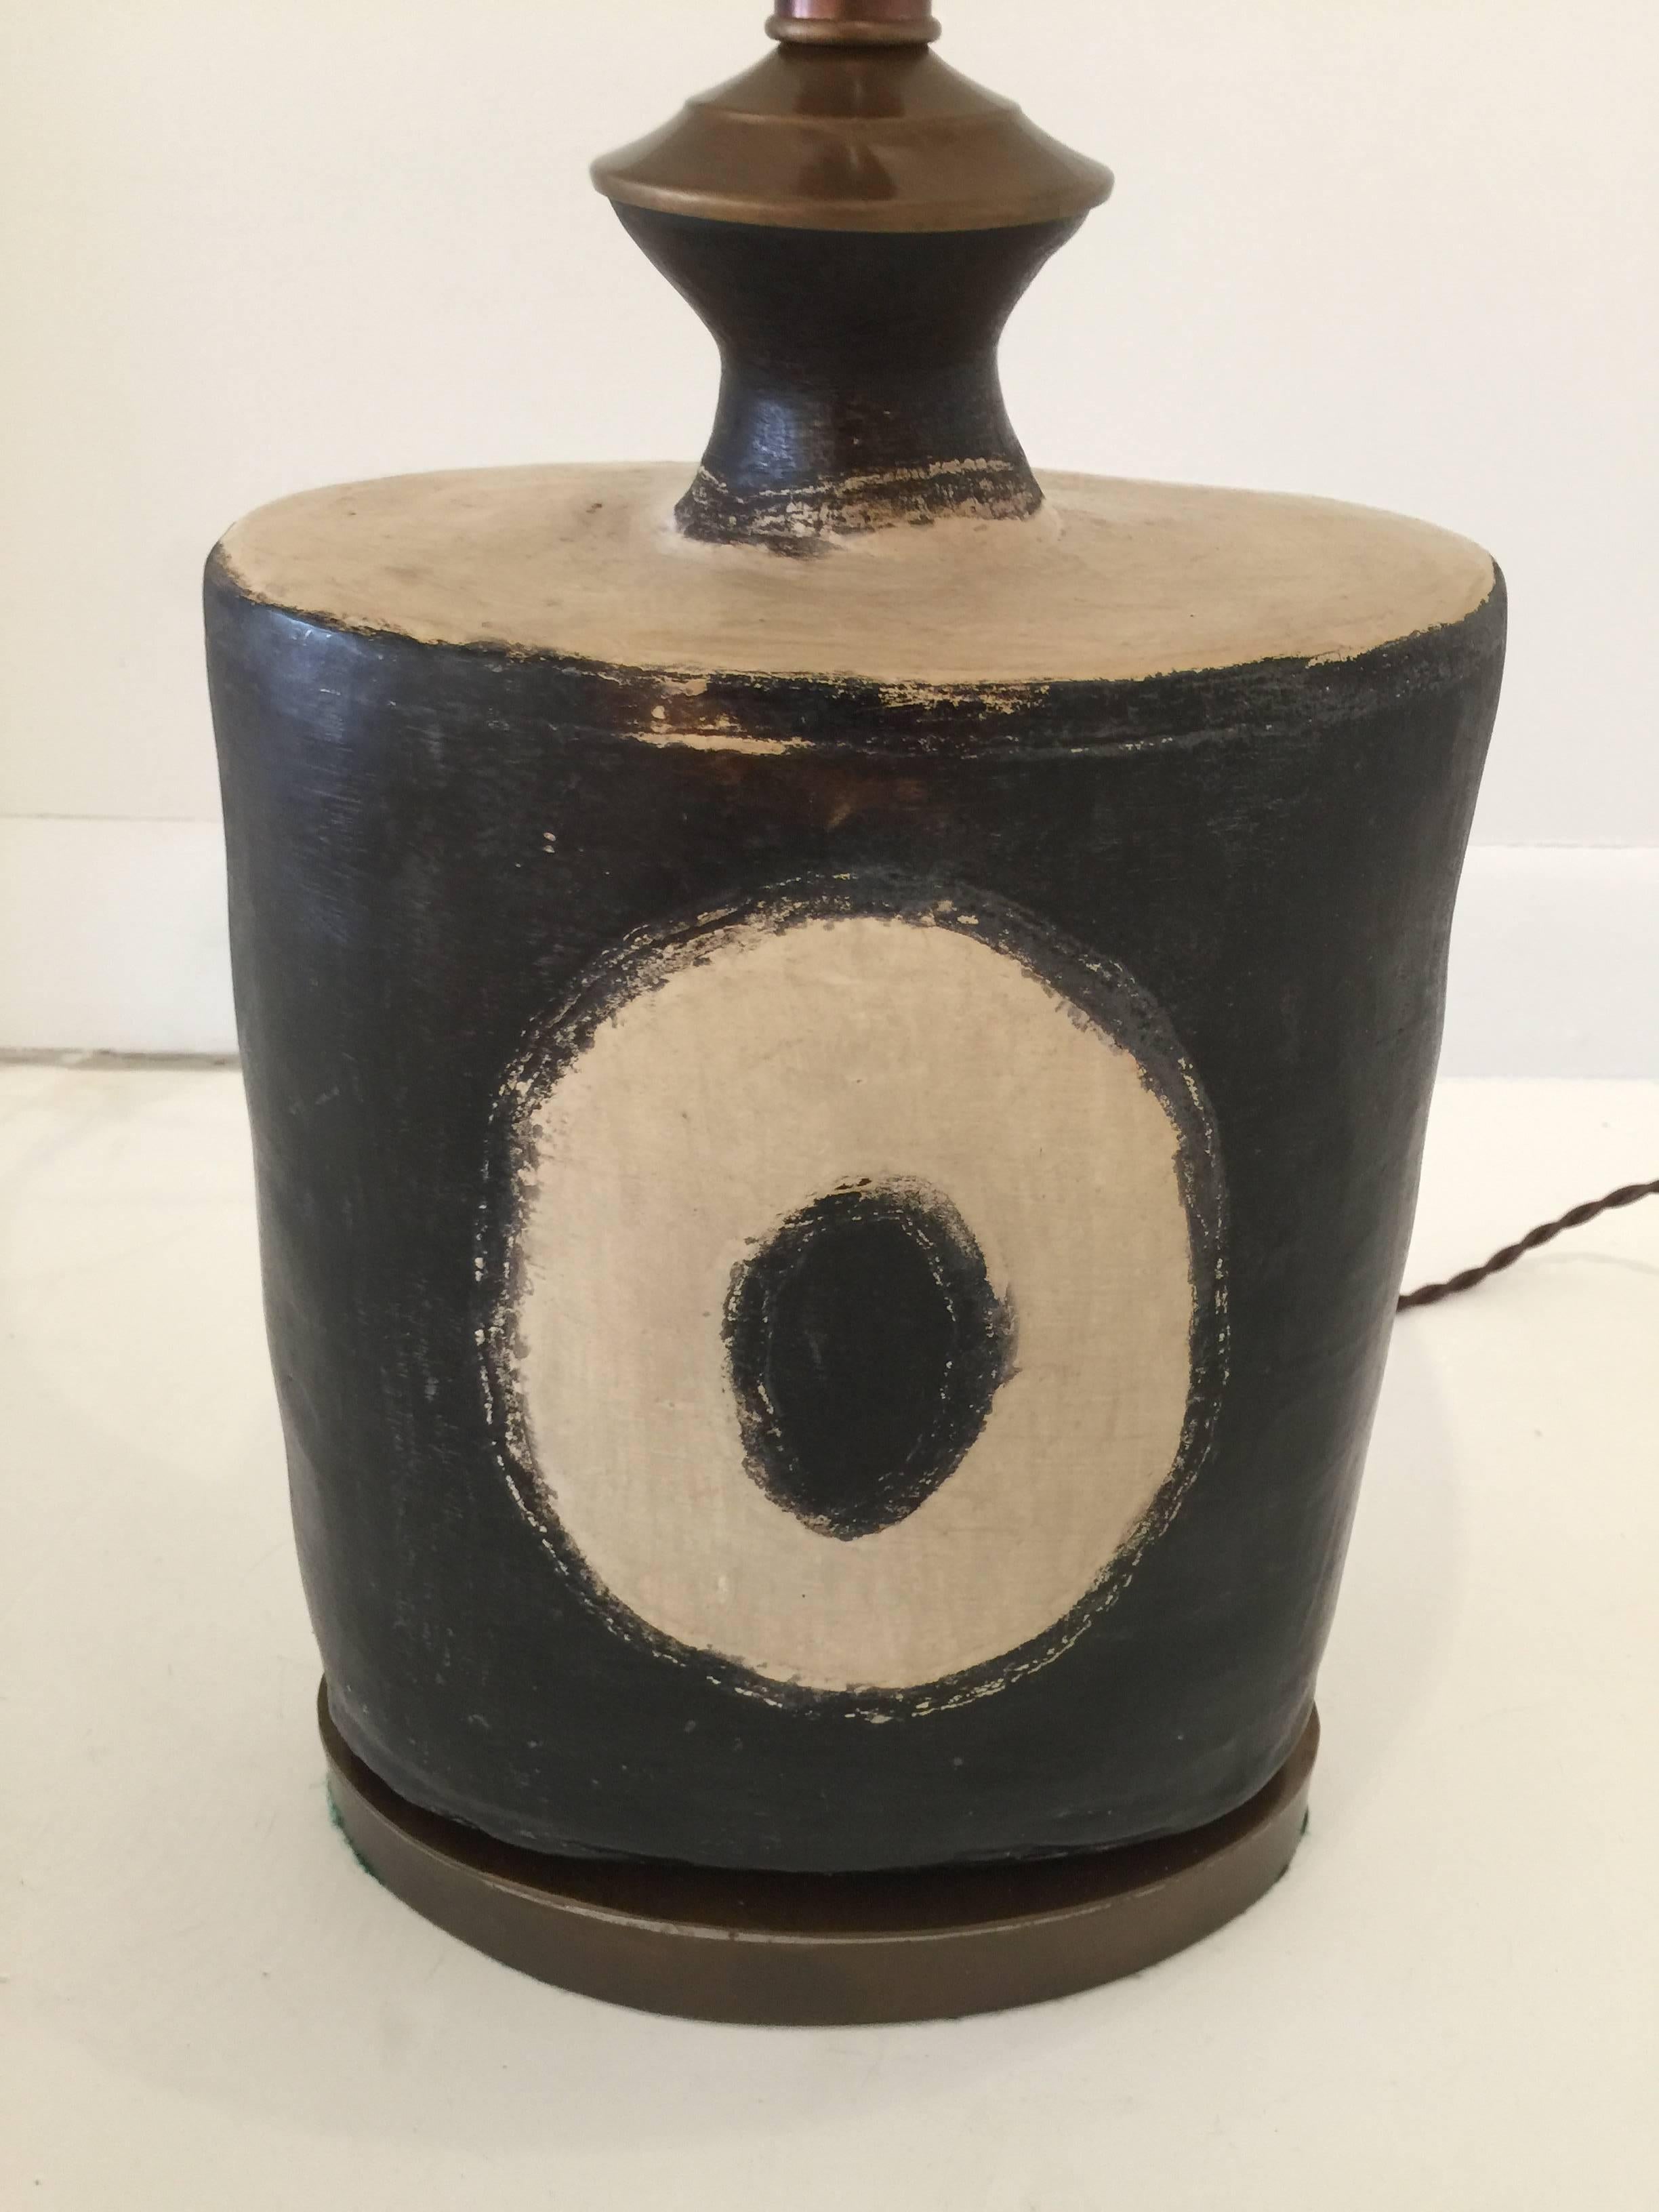 Double sockets and new silk wiring. This lovely dark earthenware with tribal motif is a sleek and modern use of indigenous art.